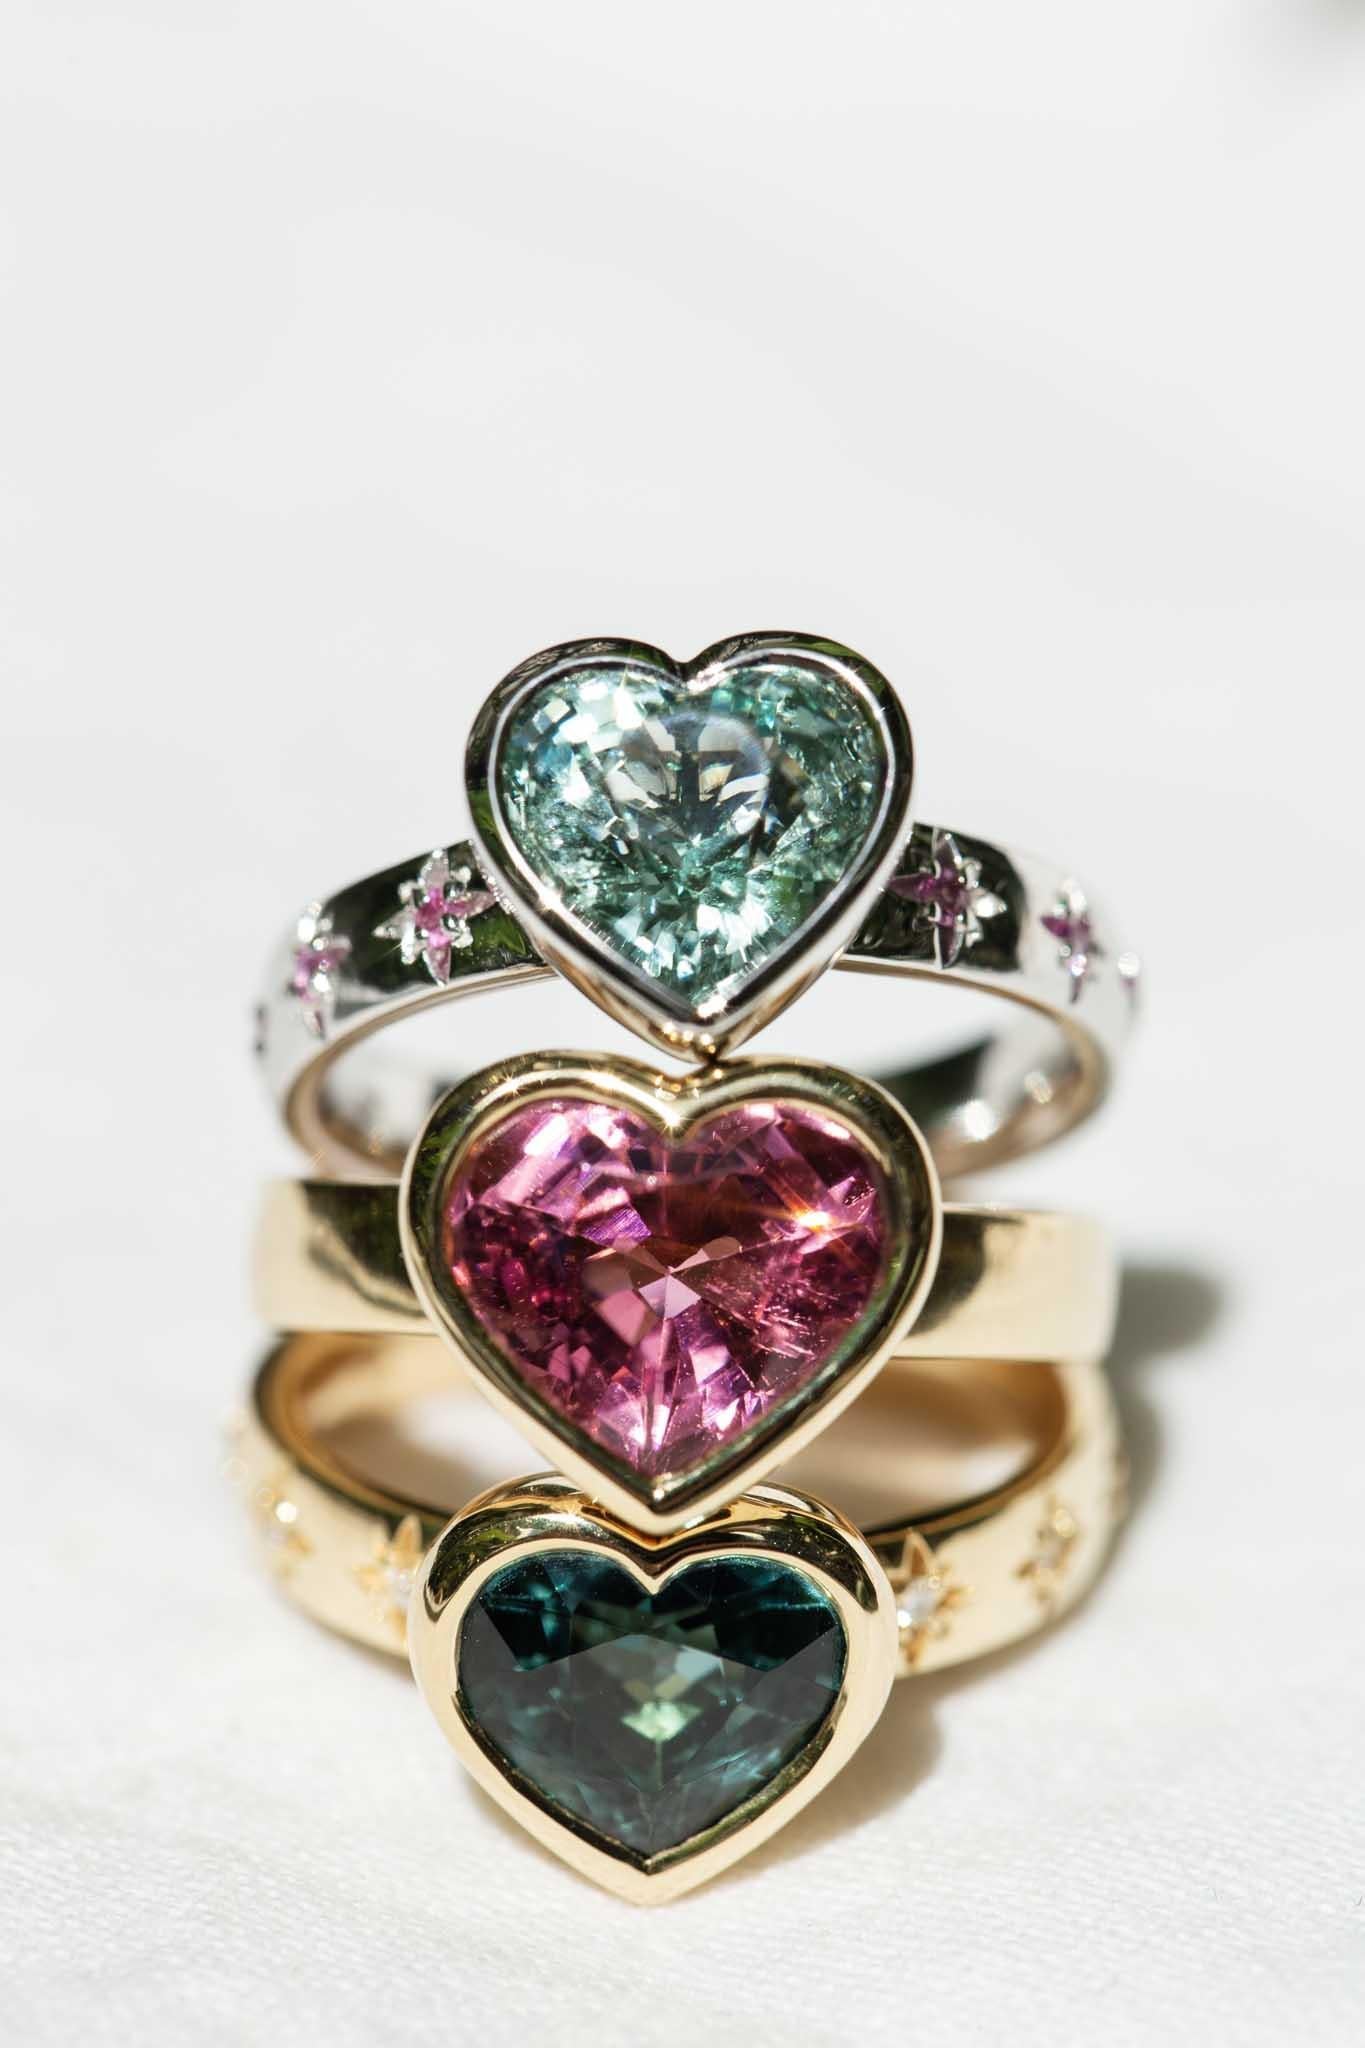 LOVE, EXPRESSED
 
heartbeats flutter
glances meet
doubts forgotten
a love complete
 
The stunning Cerys ring features a perfect pink heart cut tourmaline on a gleaming yellow gold band. Her captivating jewel is a darling symbol of newfound love and